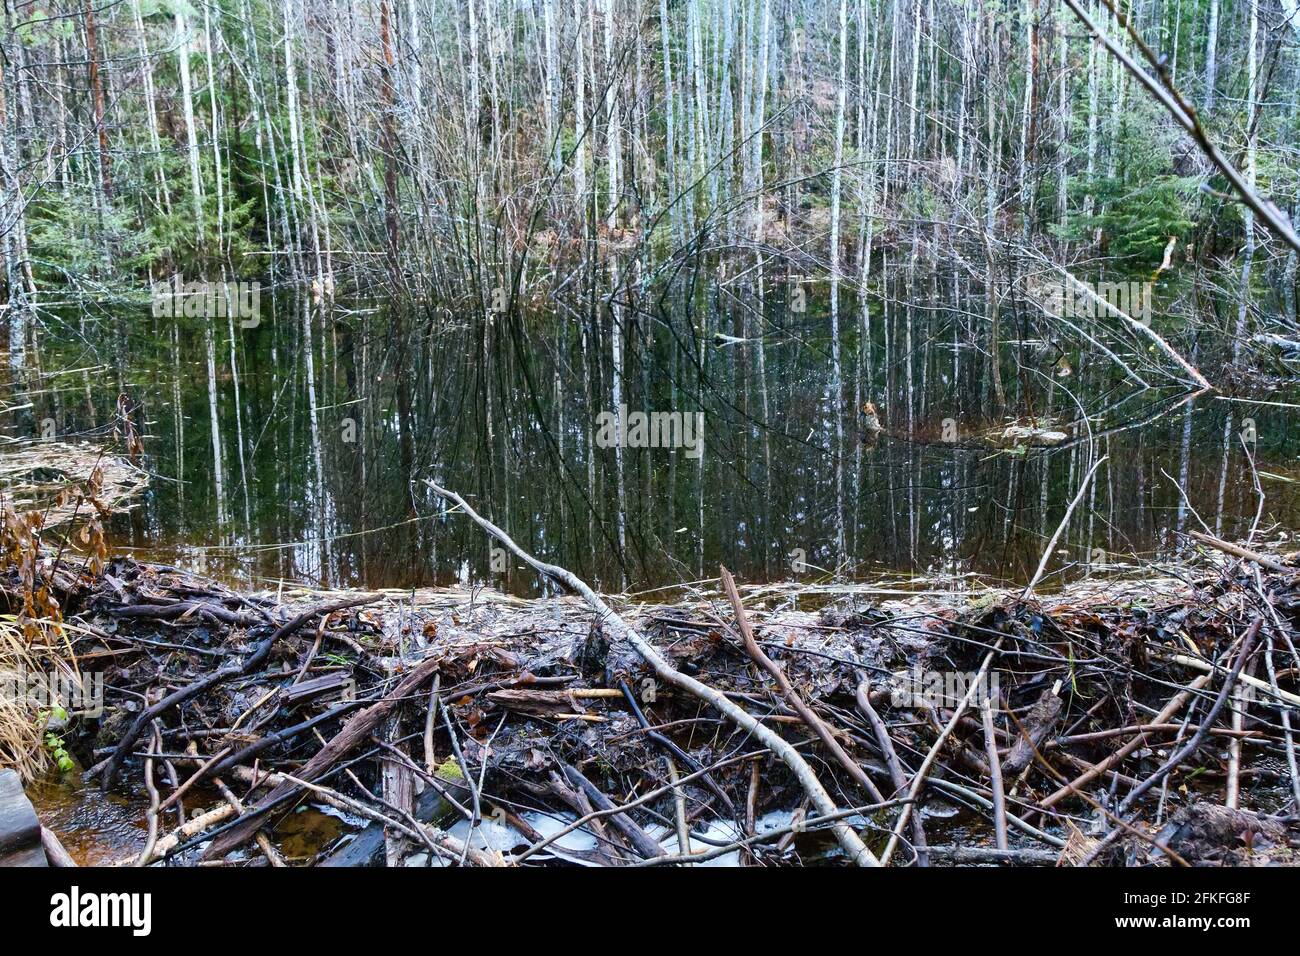 Upgrade-stream side of the beaver dam, Beavers dammed the stream in late autumn after rains Stock Photo